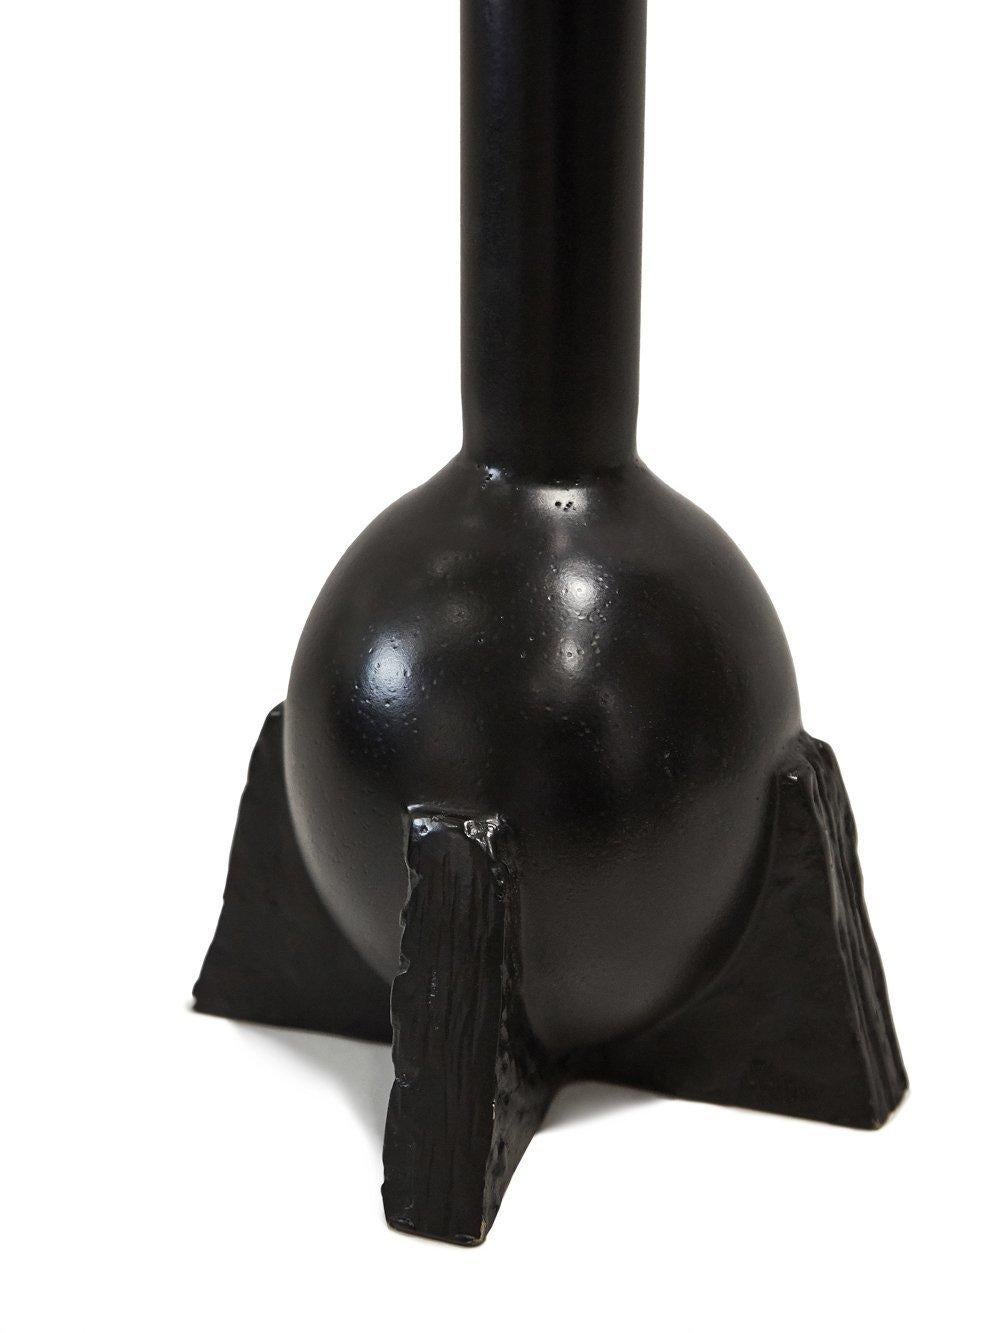 Contemporary bronze swan neck vase by Rick Owens.
2007.
Dimensions: L 20 x W 20 x H 71 cm.
Materials: bronze.
Weight: 4.5 kg.

Available in black finish or Nitrate (dark brown) finish.

Rick Owens is a California-born fashion and furniture